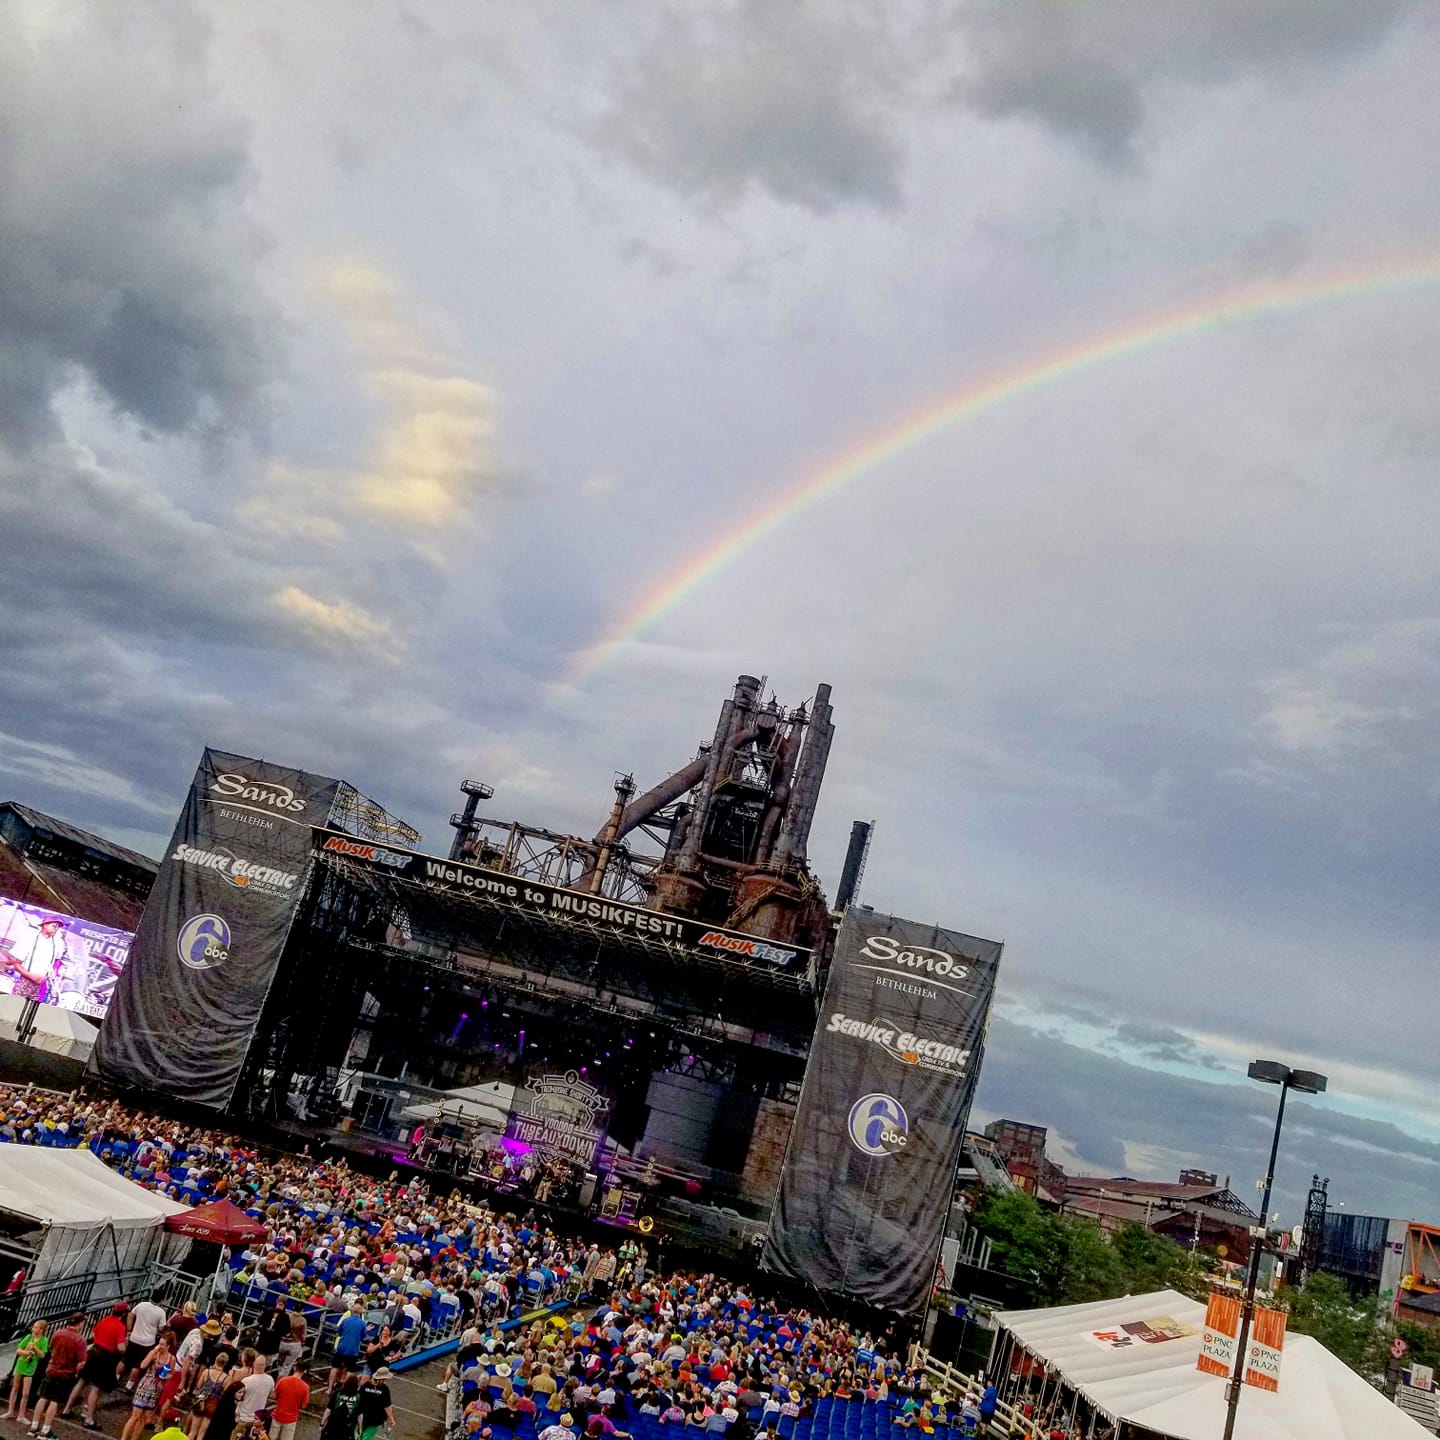 Despite rainy weather and flooding, nearly 1 million attended 2018